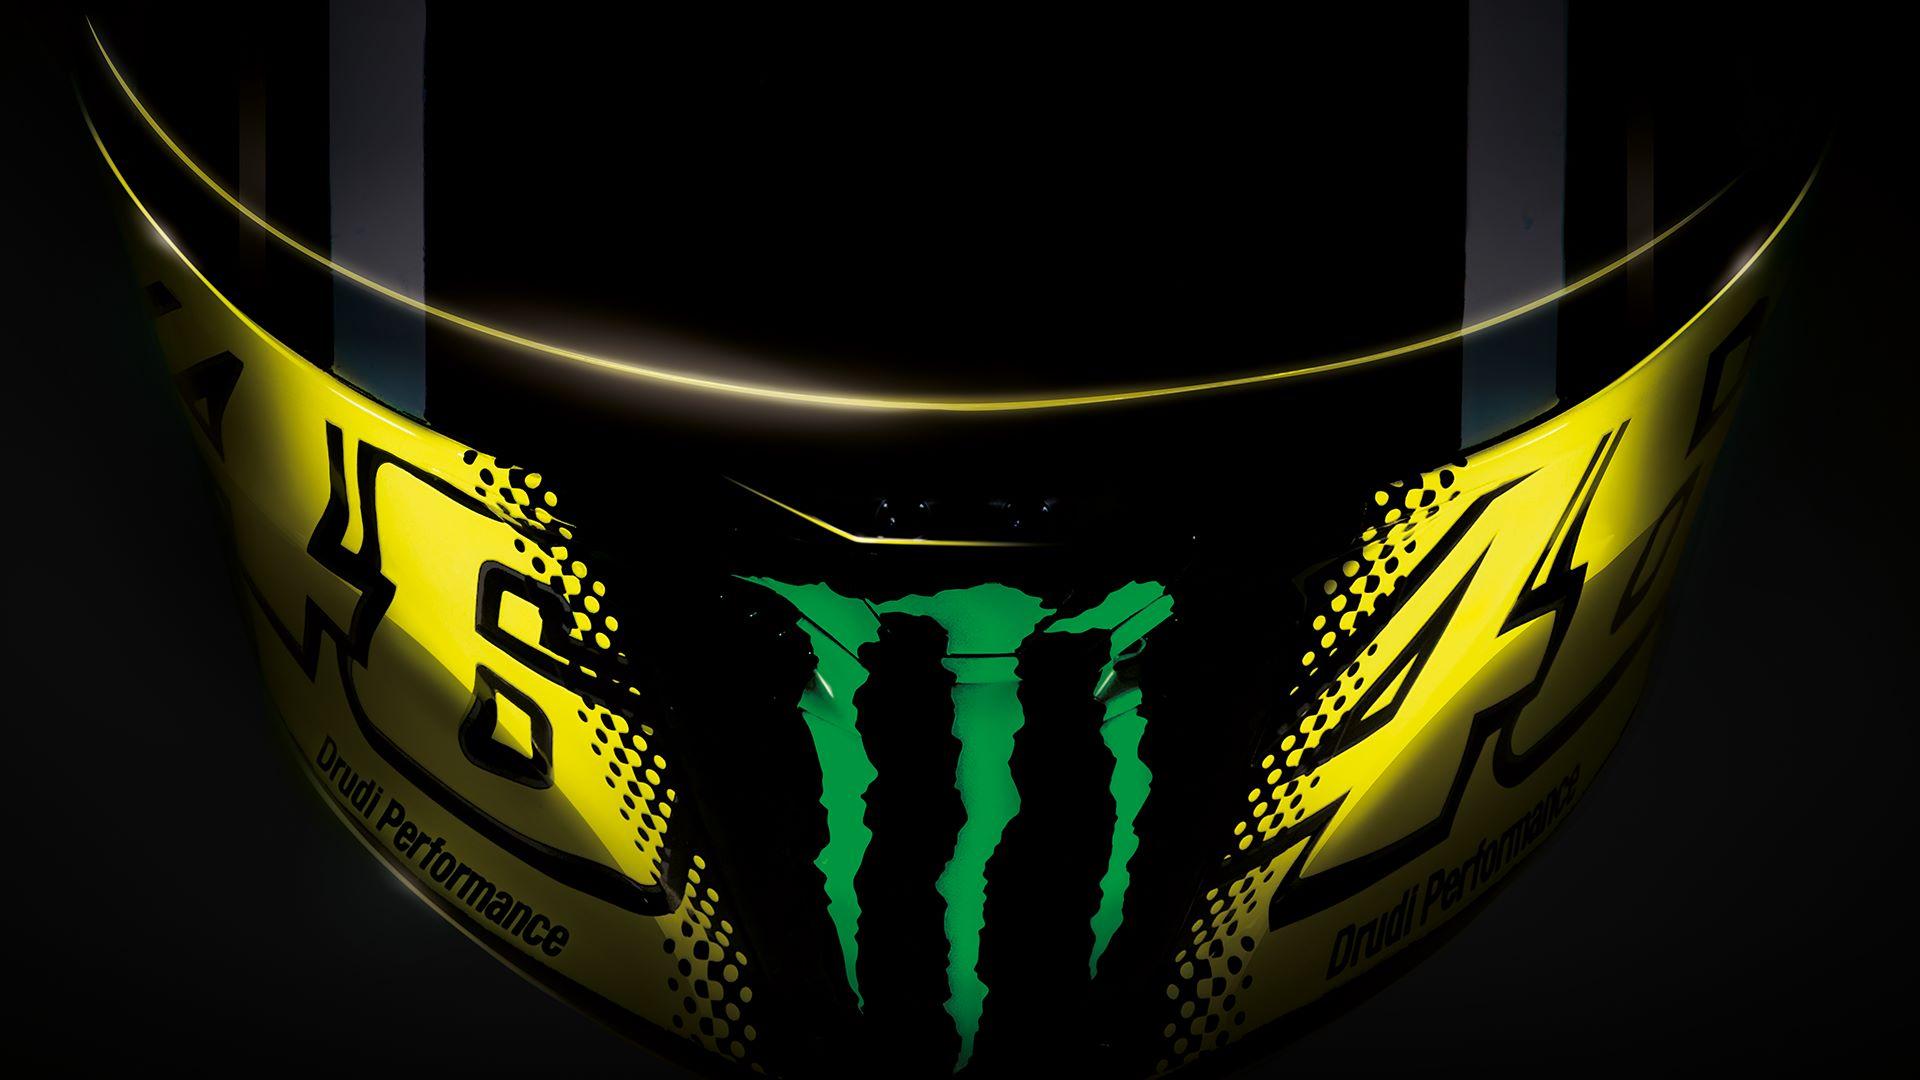 Valentino Rossi 2019 Wallpapers - Wallpaper Cave